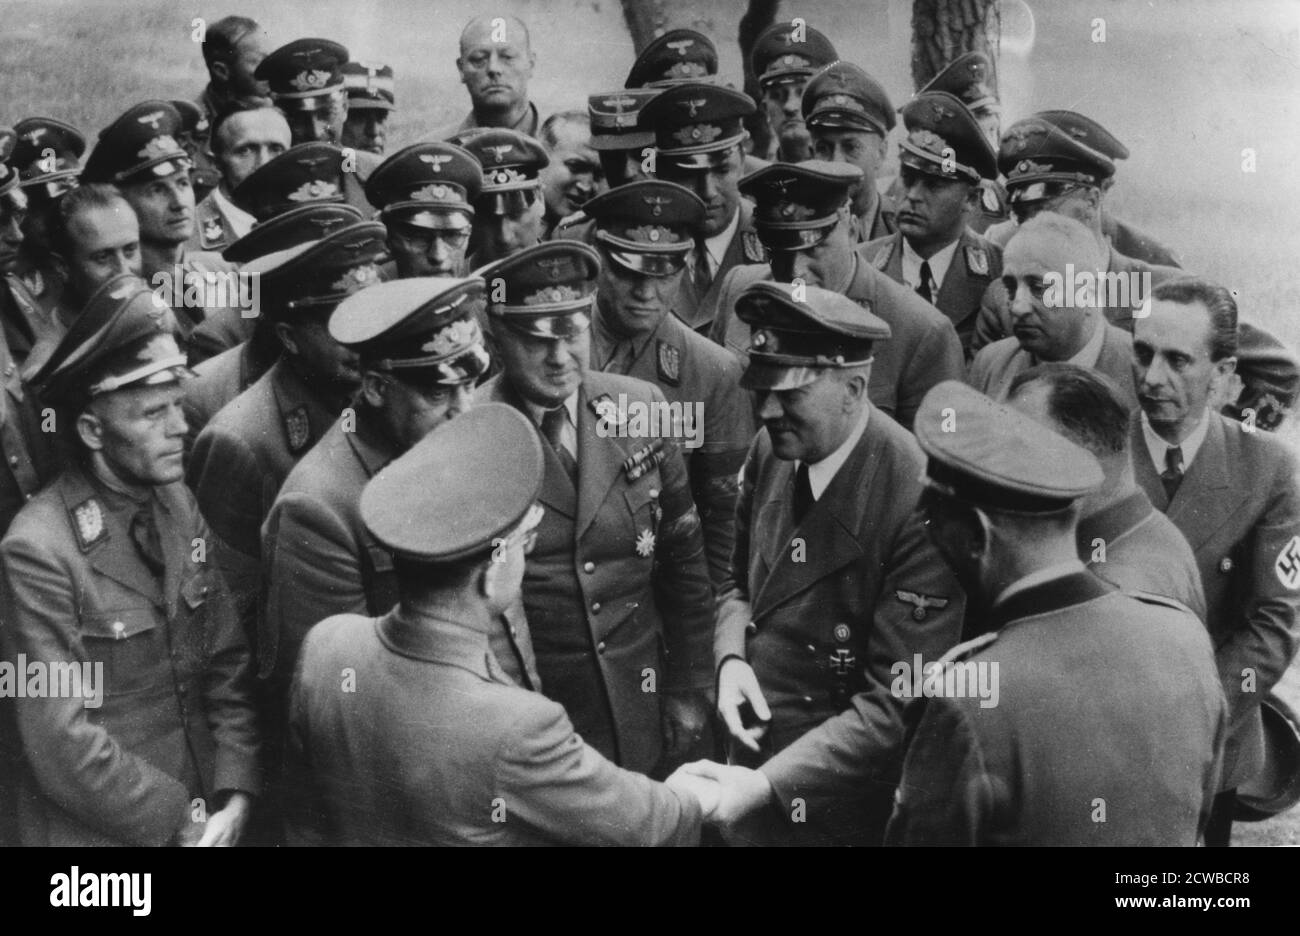 Adolf Hitler meeting with senior Nazis, Germany, August 1944. Hitler with reichsleiters and gauleiters (senior Nazi officials) after a meeting at his headquarters. The photograph was taken a month after the attempt on Hitler's life and Joseph Goebbels is on the right. The photographer is unknown. Stock Photo